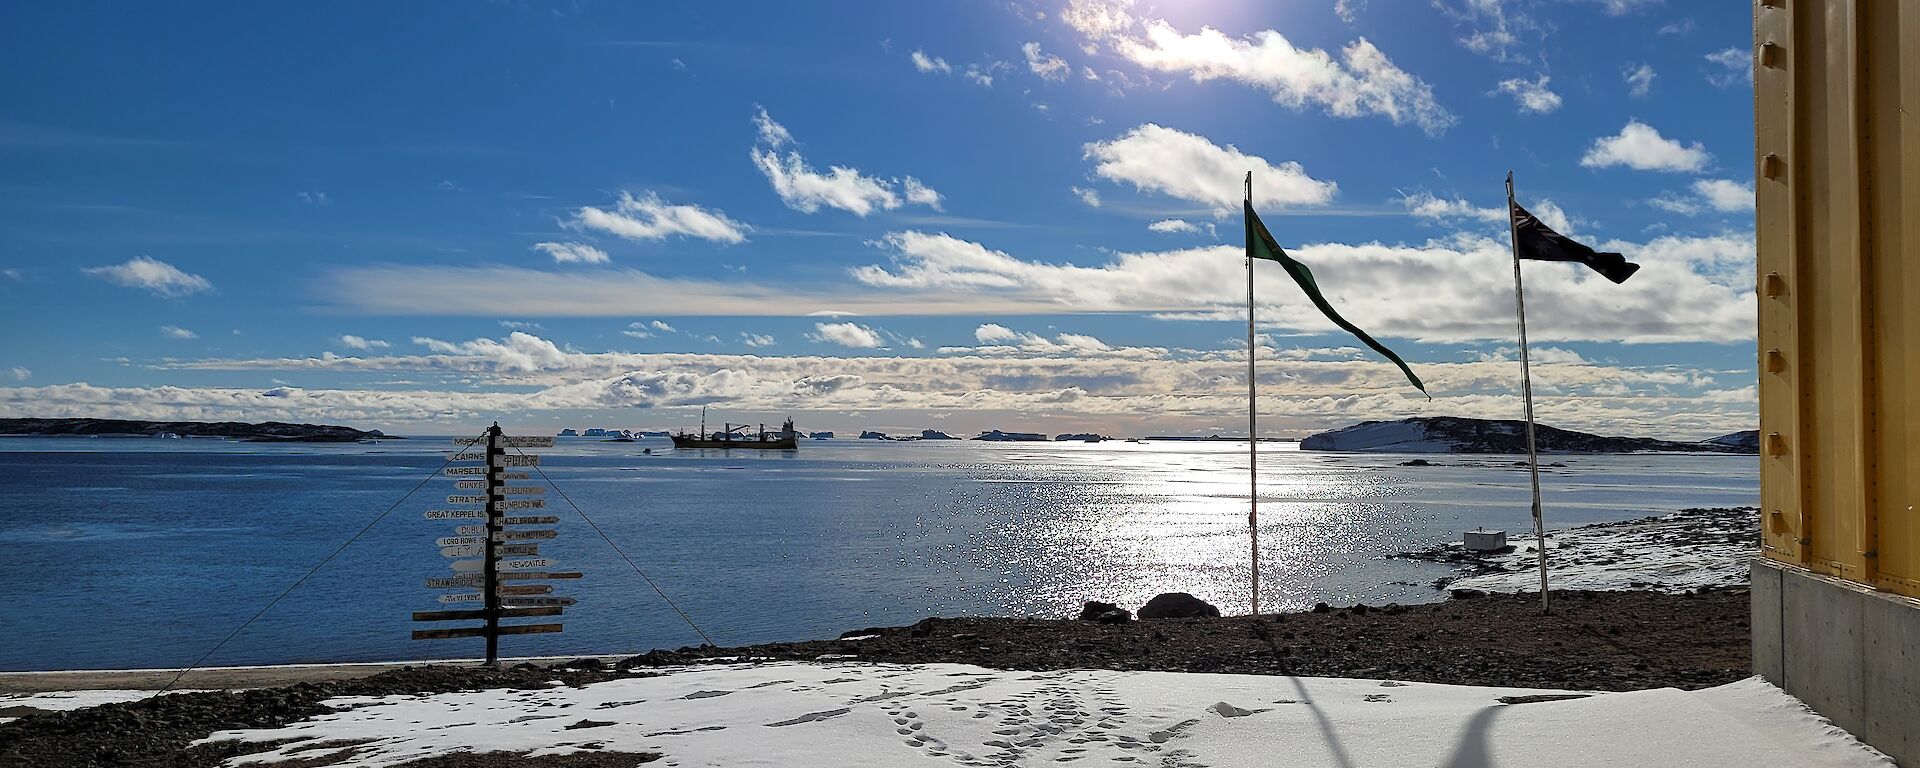 An ocean view with blue sky, snow on the ground and some flags